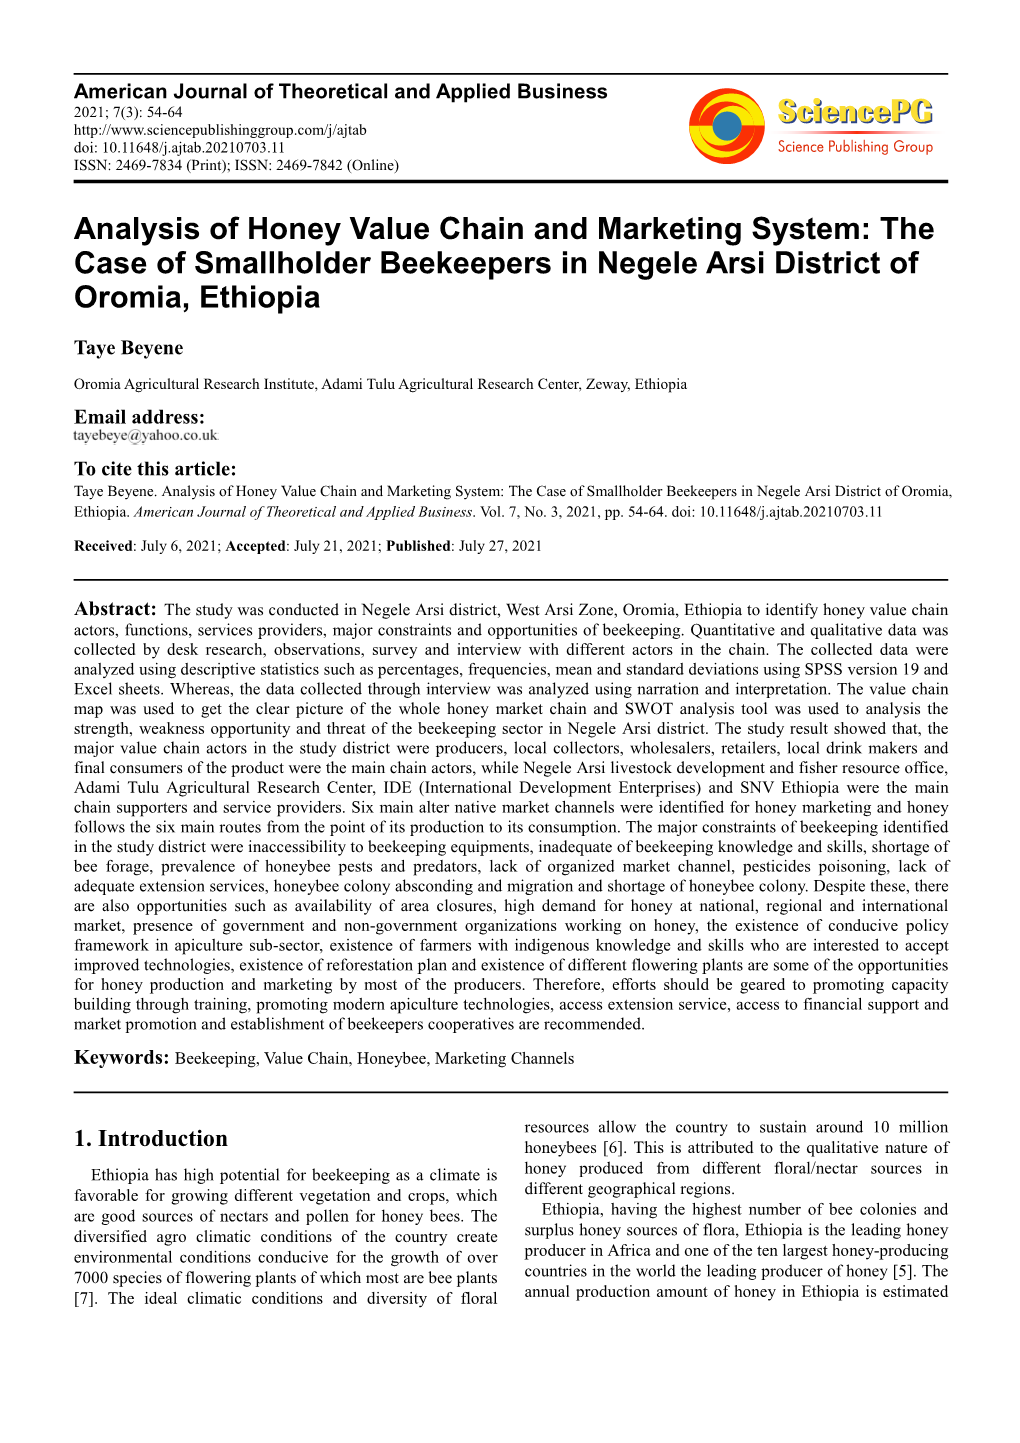 Analysis of Honey Value Chain and Marketing System: the Case of Smallholder Beekeepers in Negele Arsi District of Oromia, Ethiopia